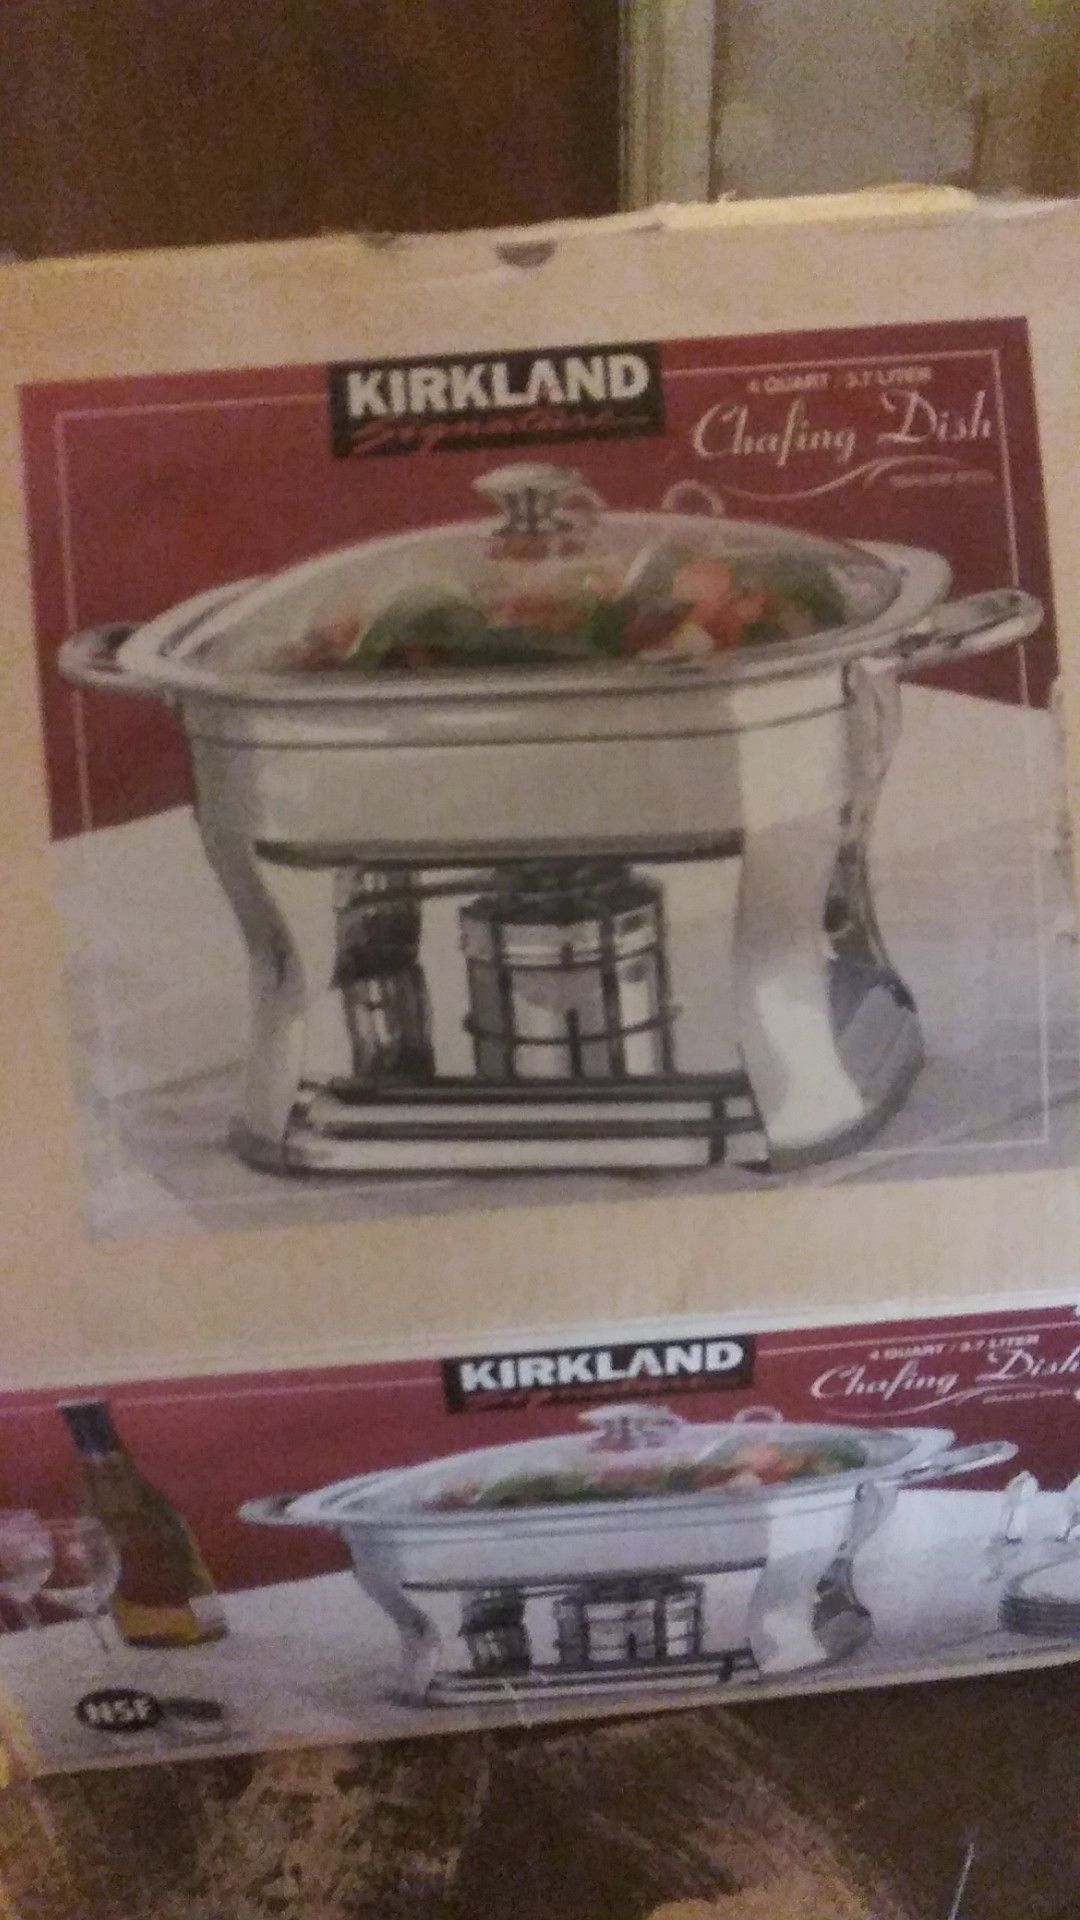 Stainless steel chafing dish 4 qaurt or 3.7 liters..